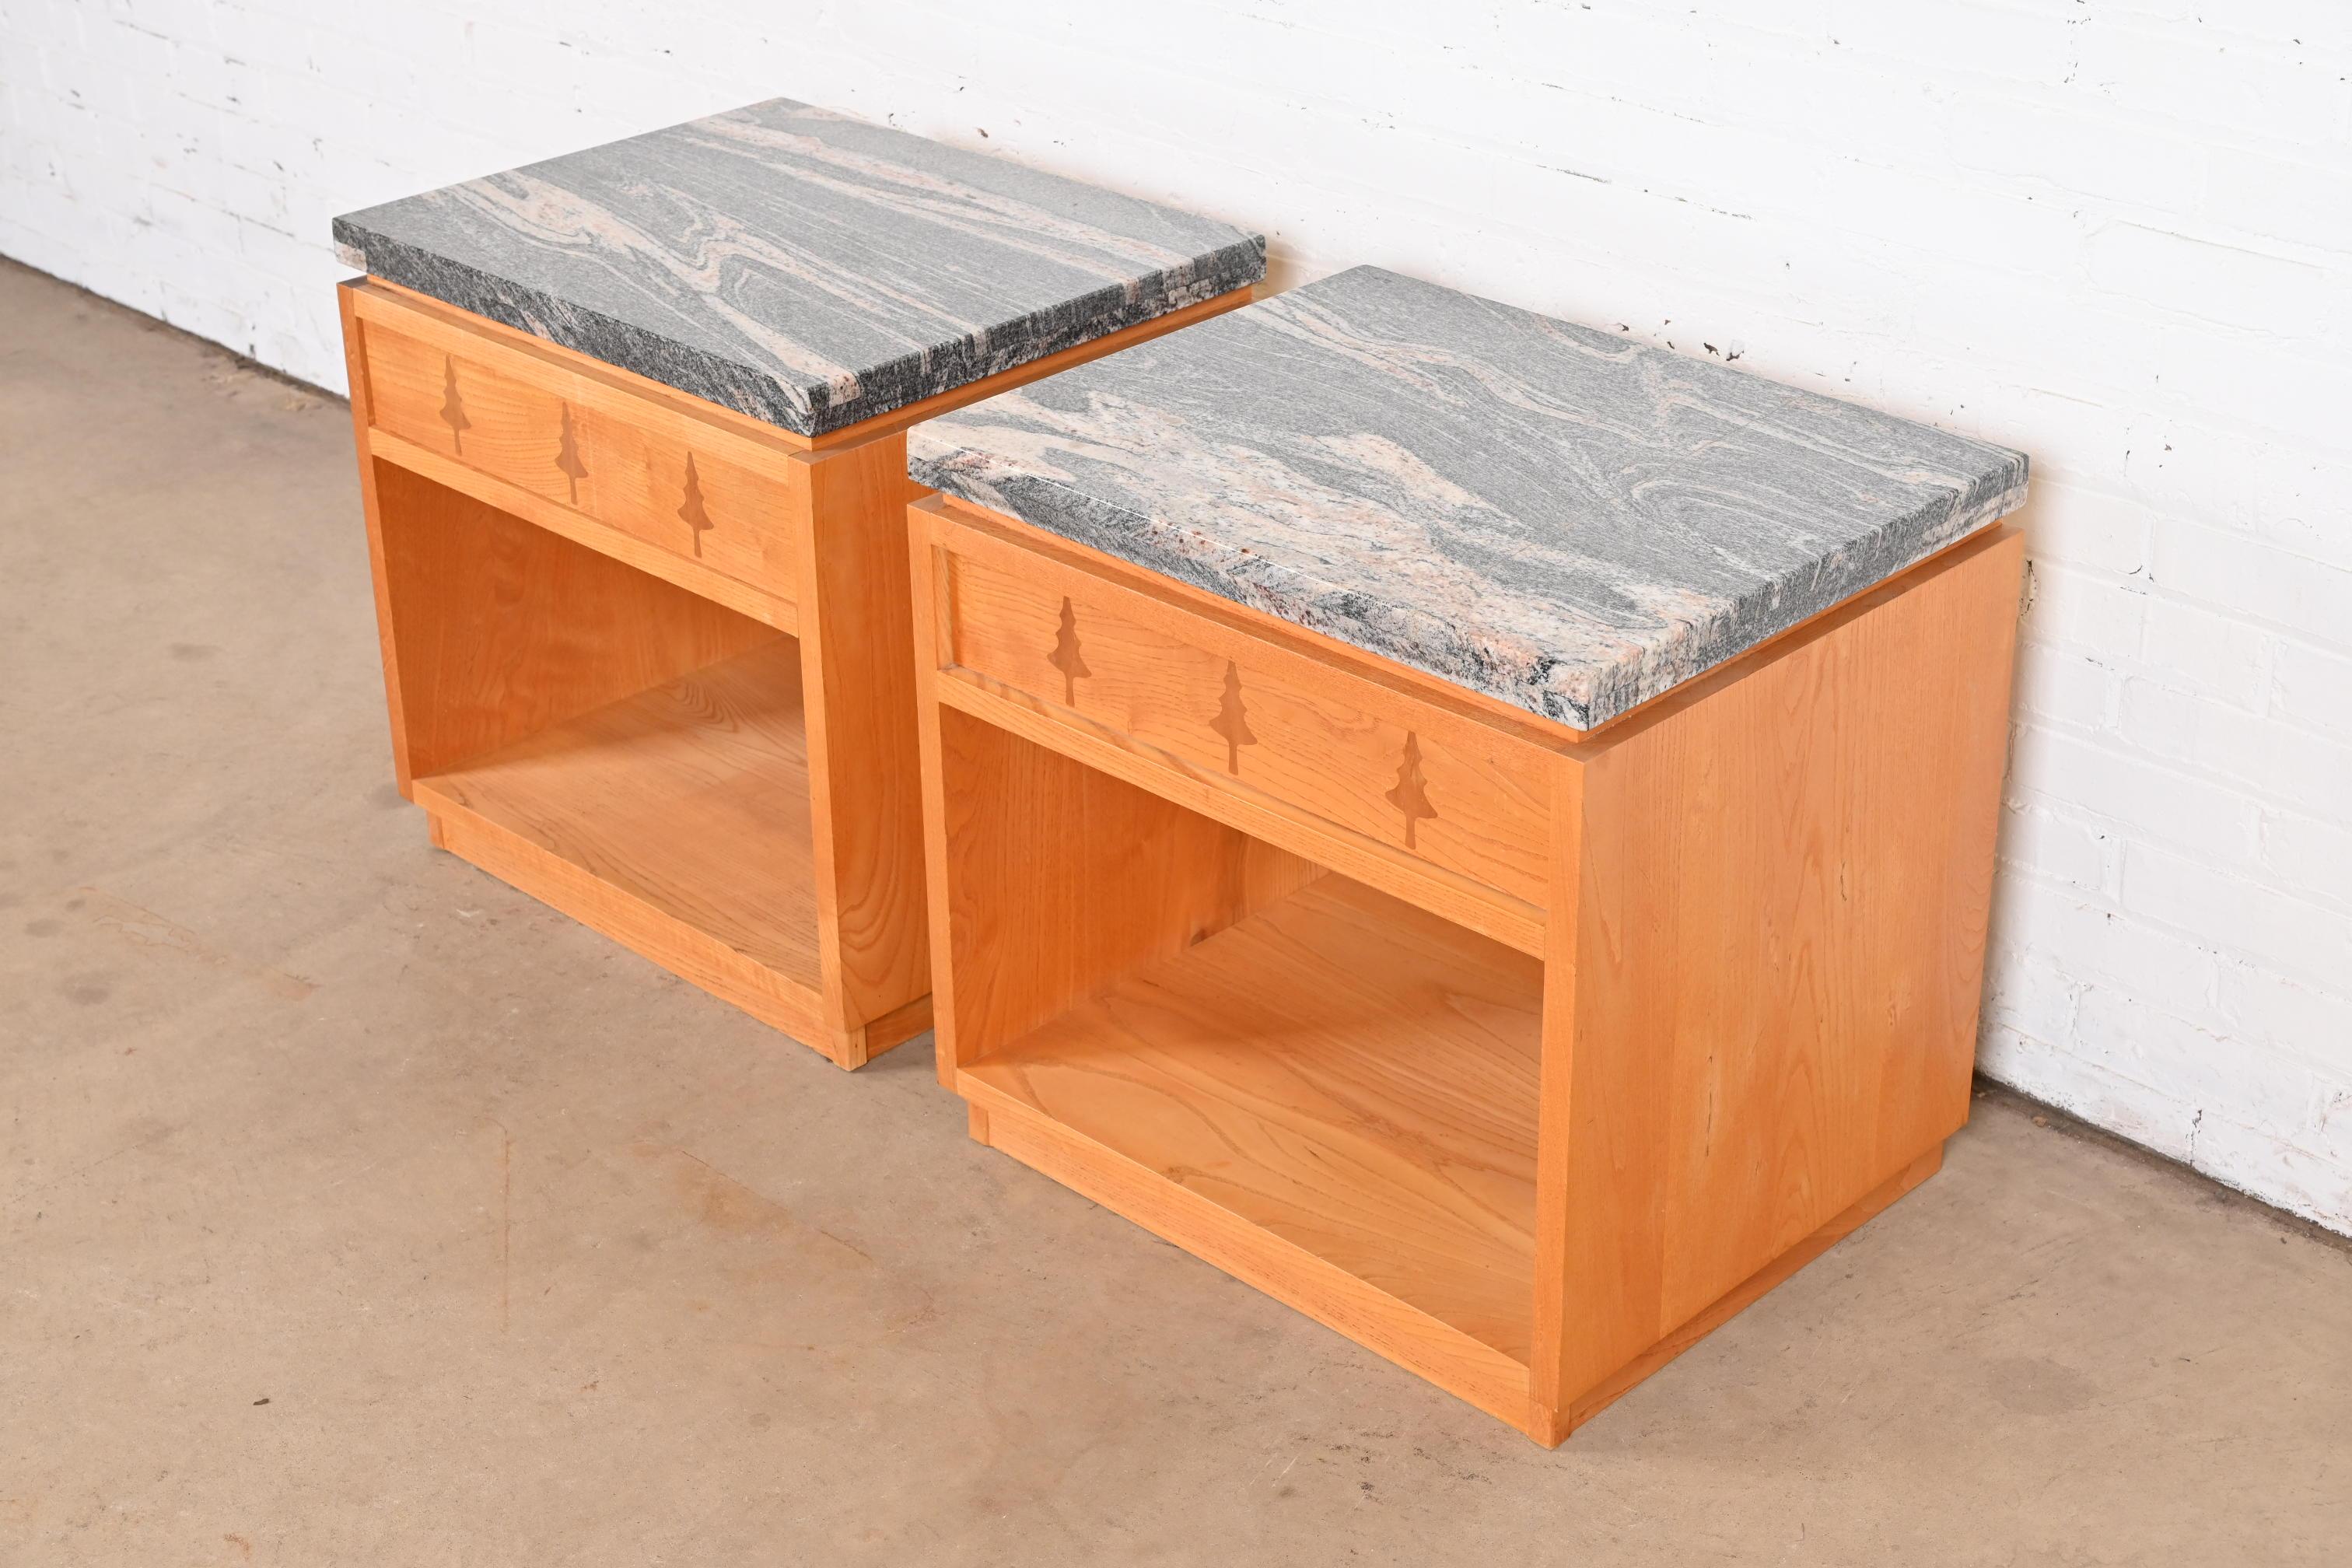 Studio Crafted Rustic Lodge Inlaid Pine Marble Top Nightstands, Pair In Good Condition For Sale In South Bend, IN